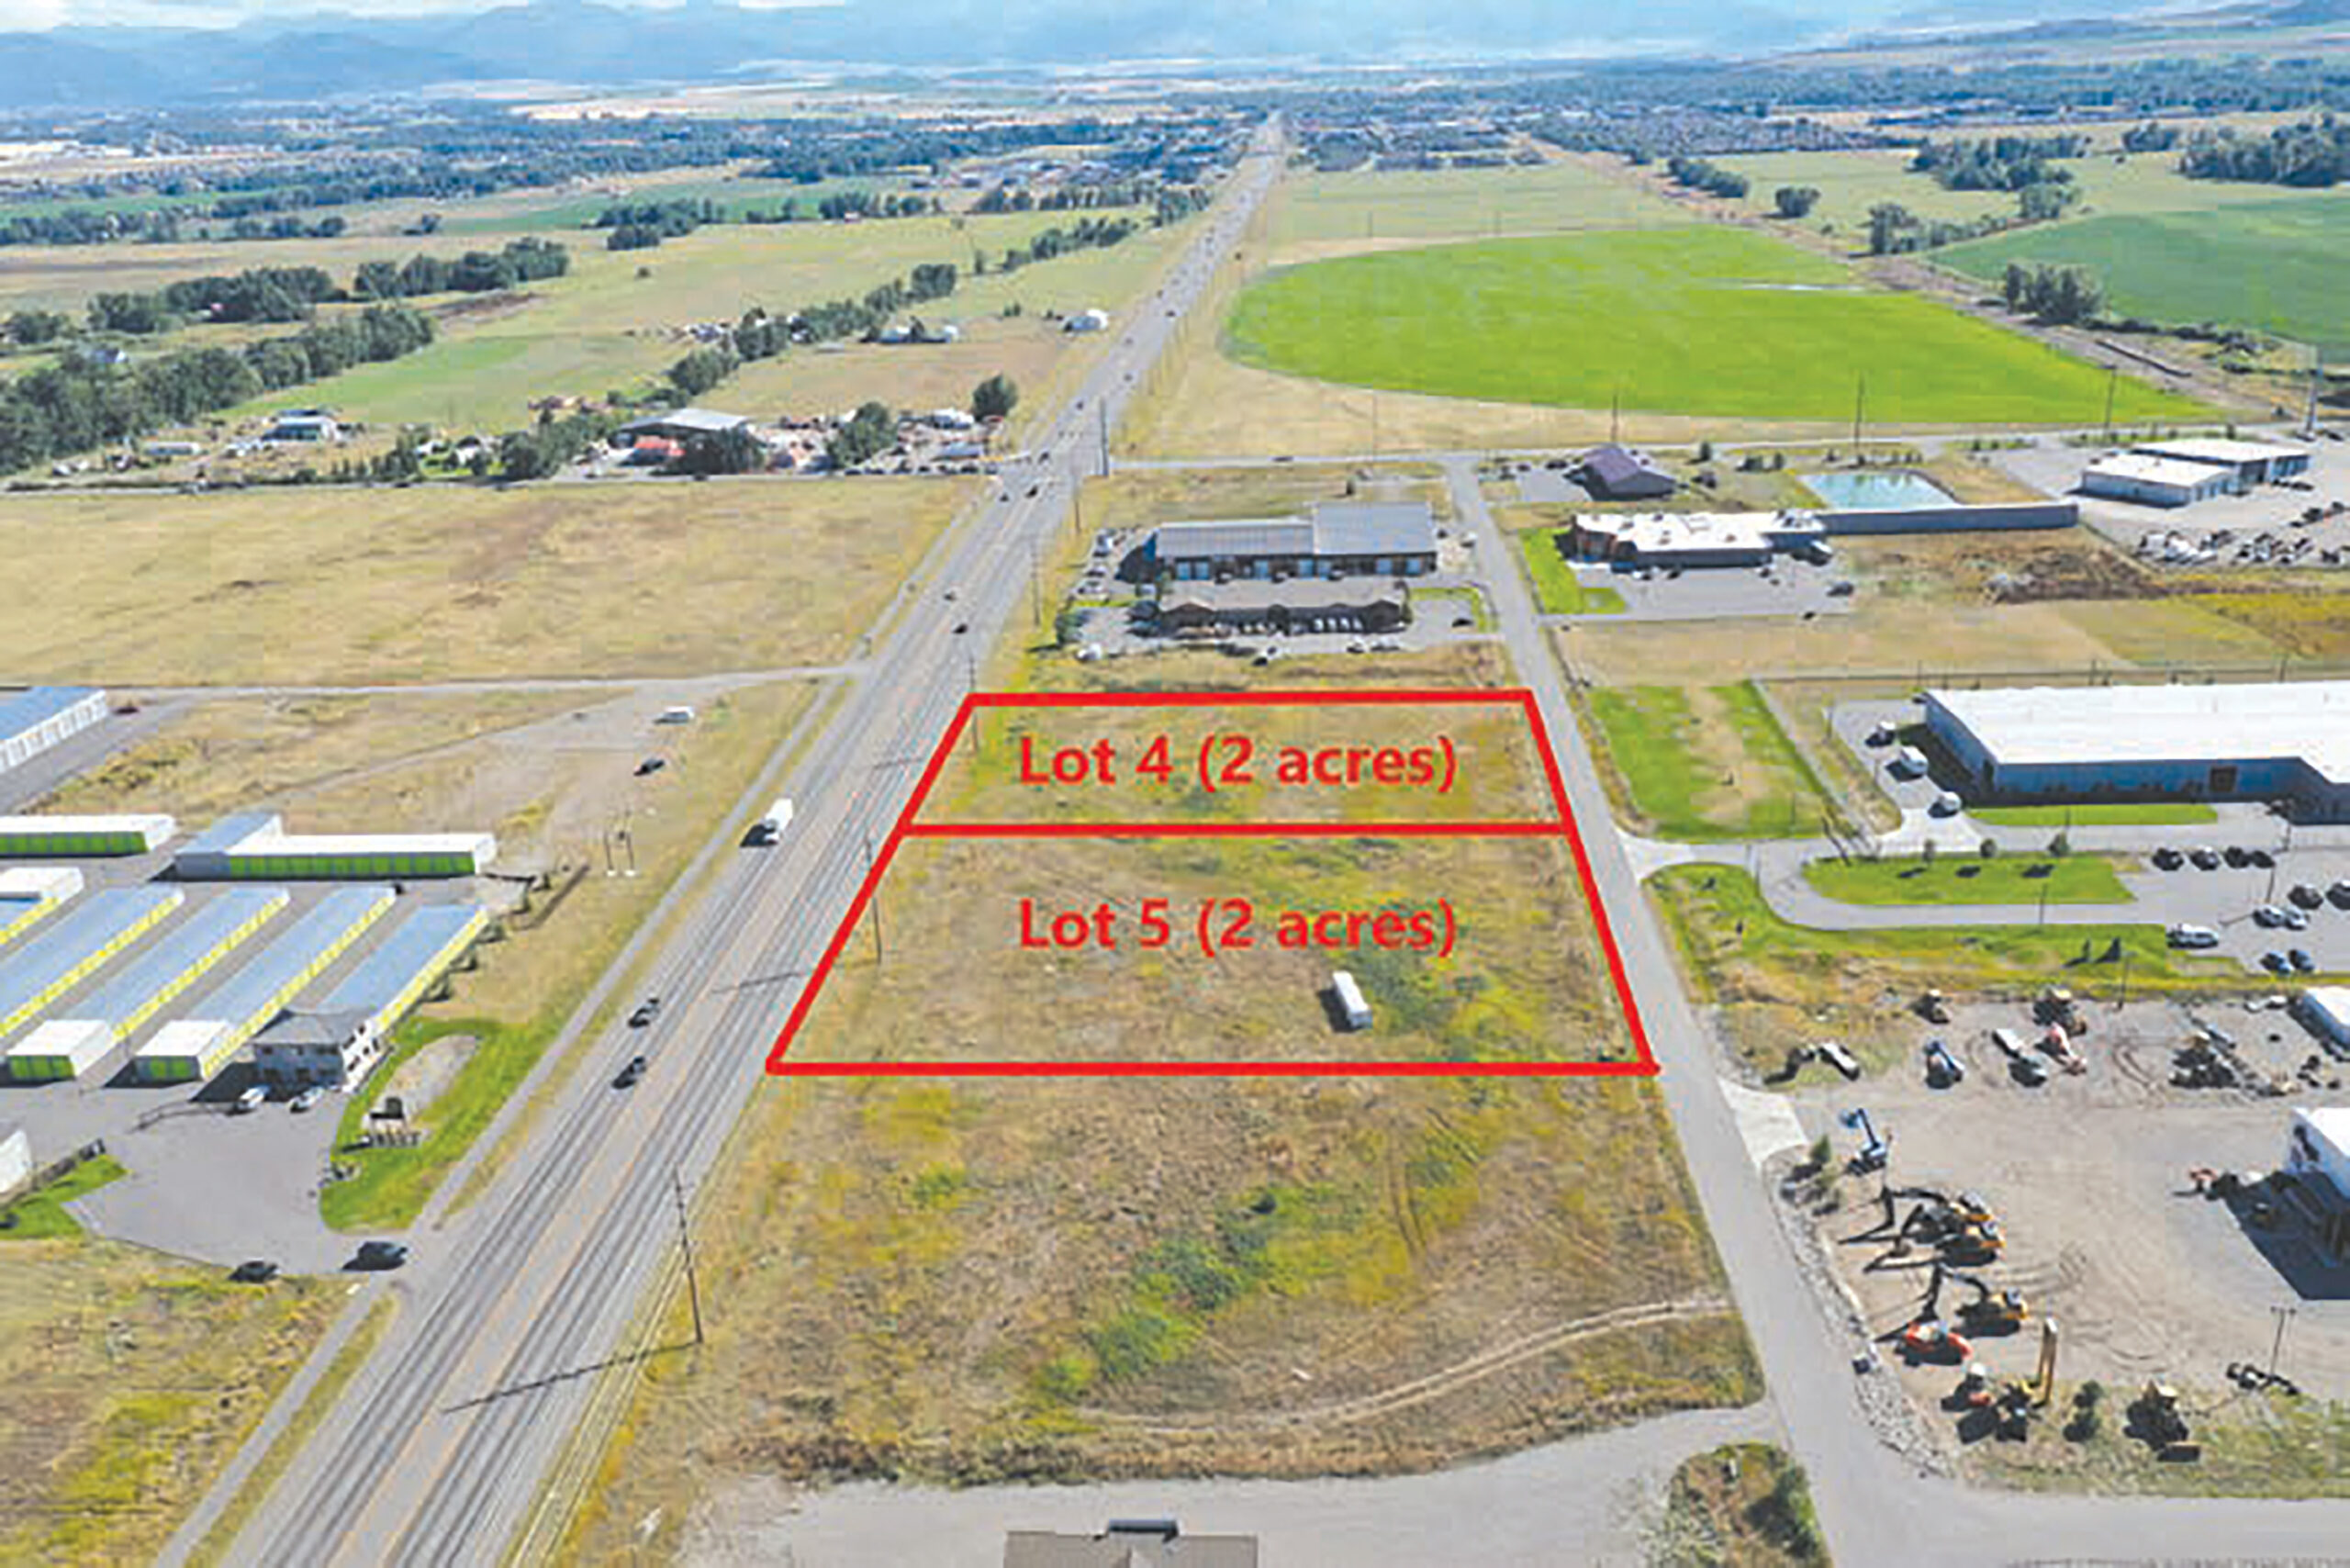 2 Acres Commeercial Lot With Jackrabbit Frontage Montana Commercial 